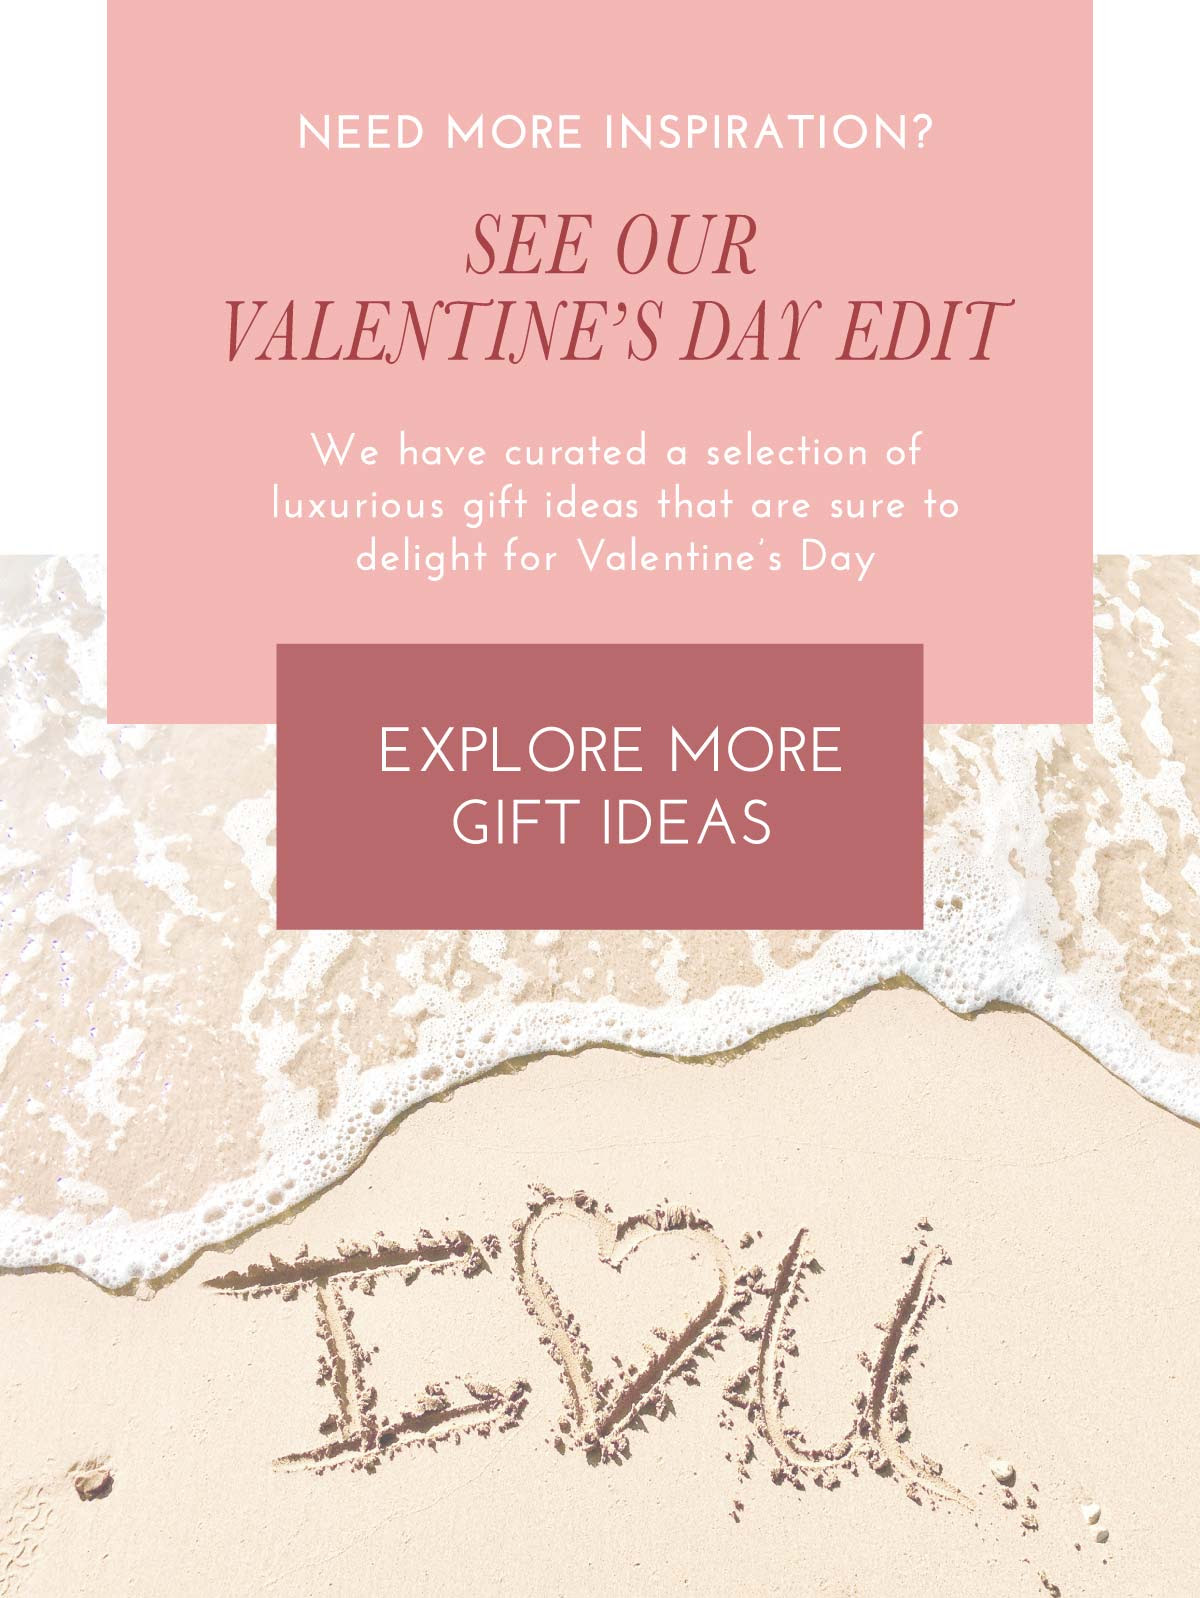 Need More Inspiration? See ou r Valentine's Day Edit.We have curated a selection of luxurious gift ideas that are sure to delight for Valentine’s Day. EXPLORE MORE GIFT IDEAS